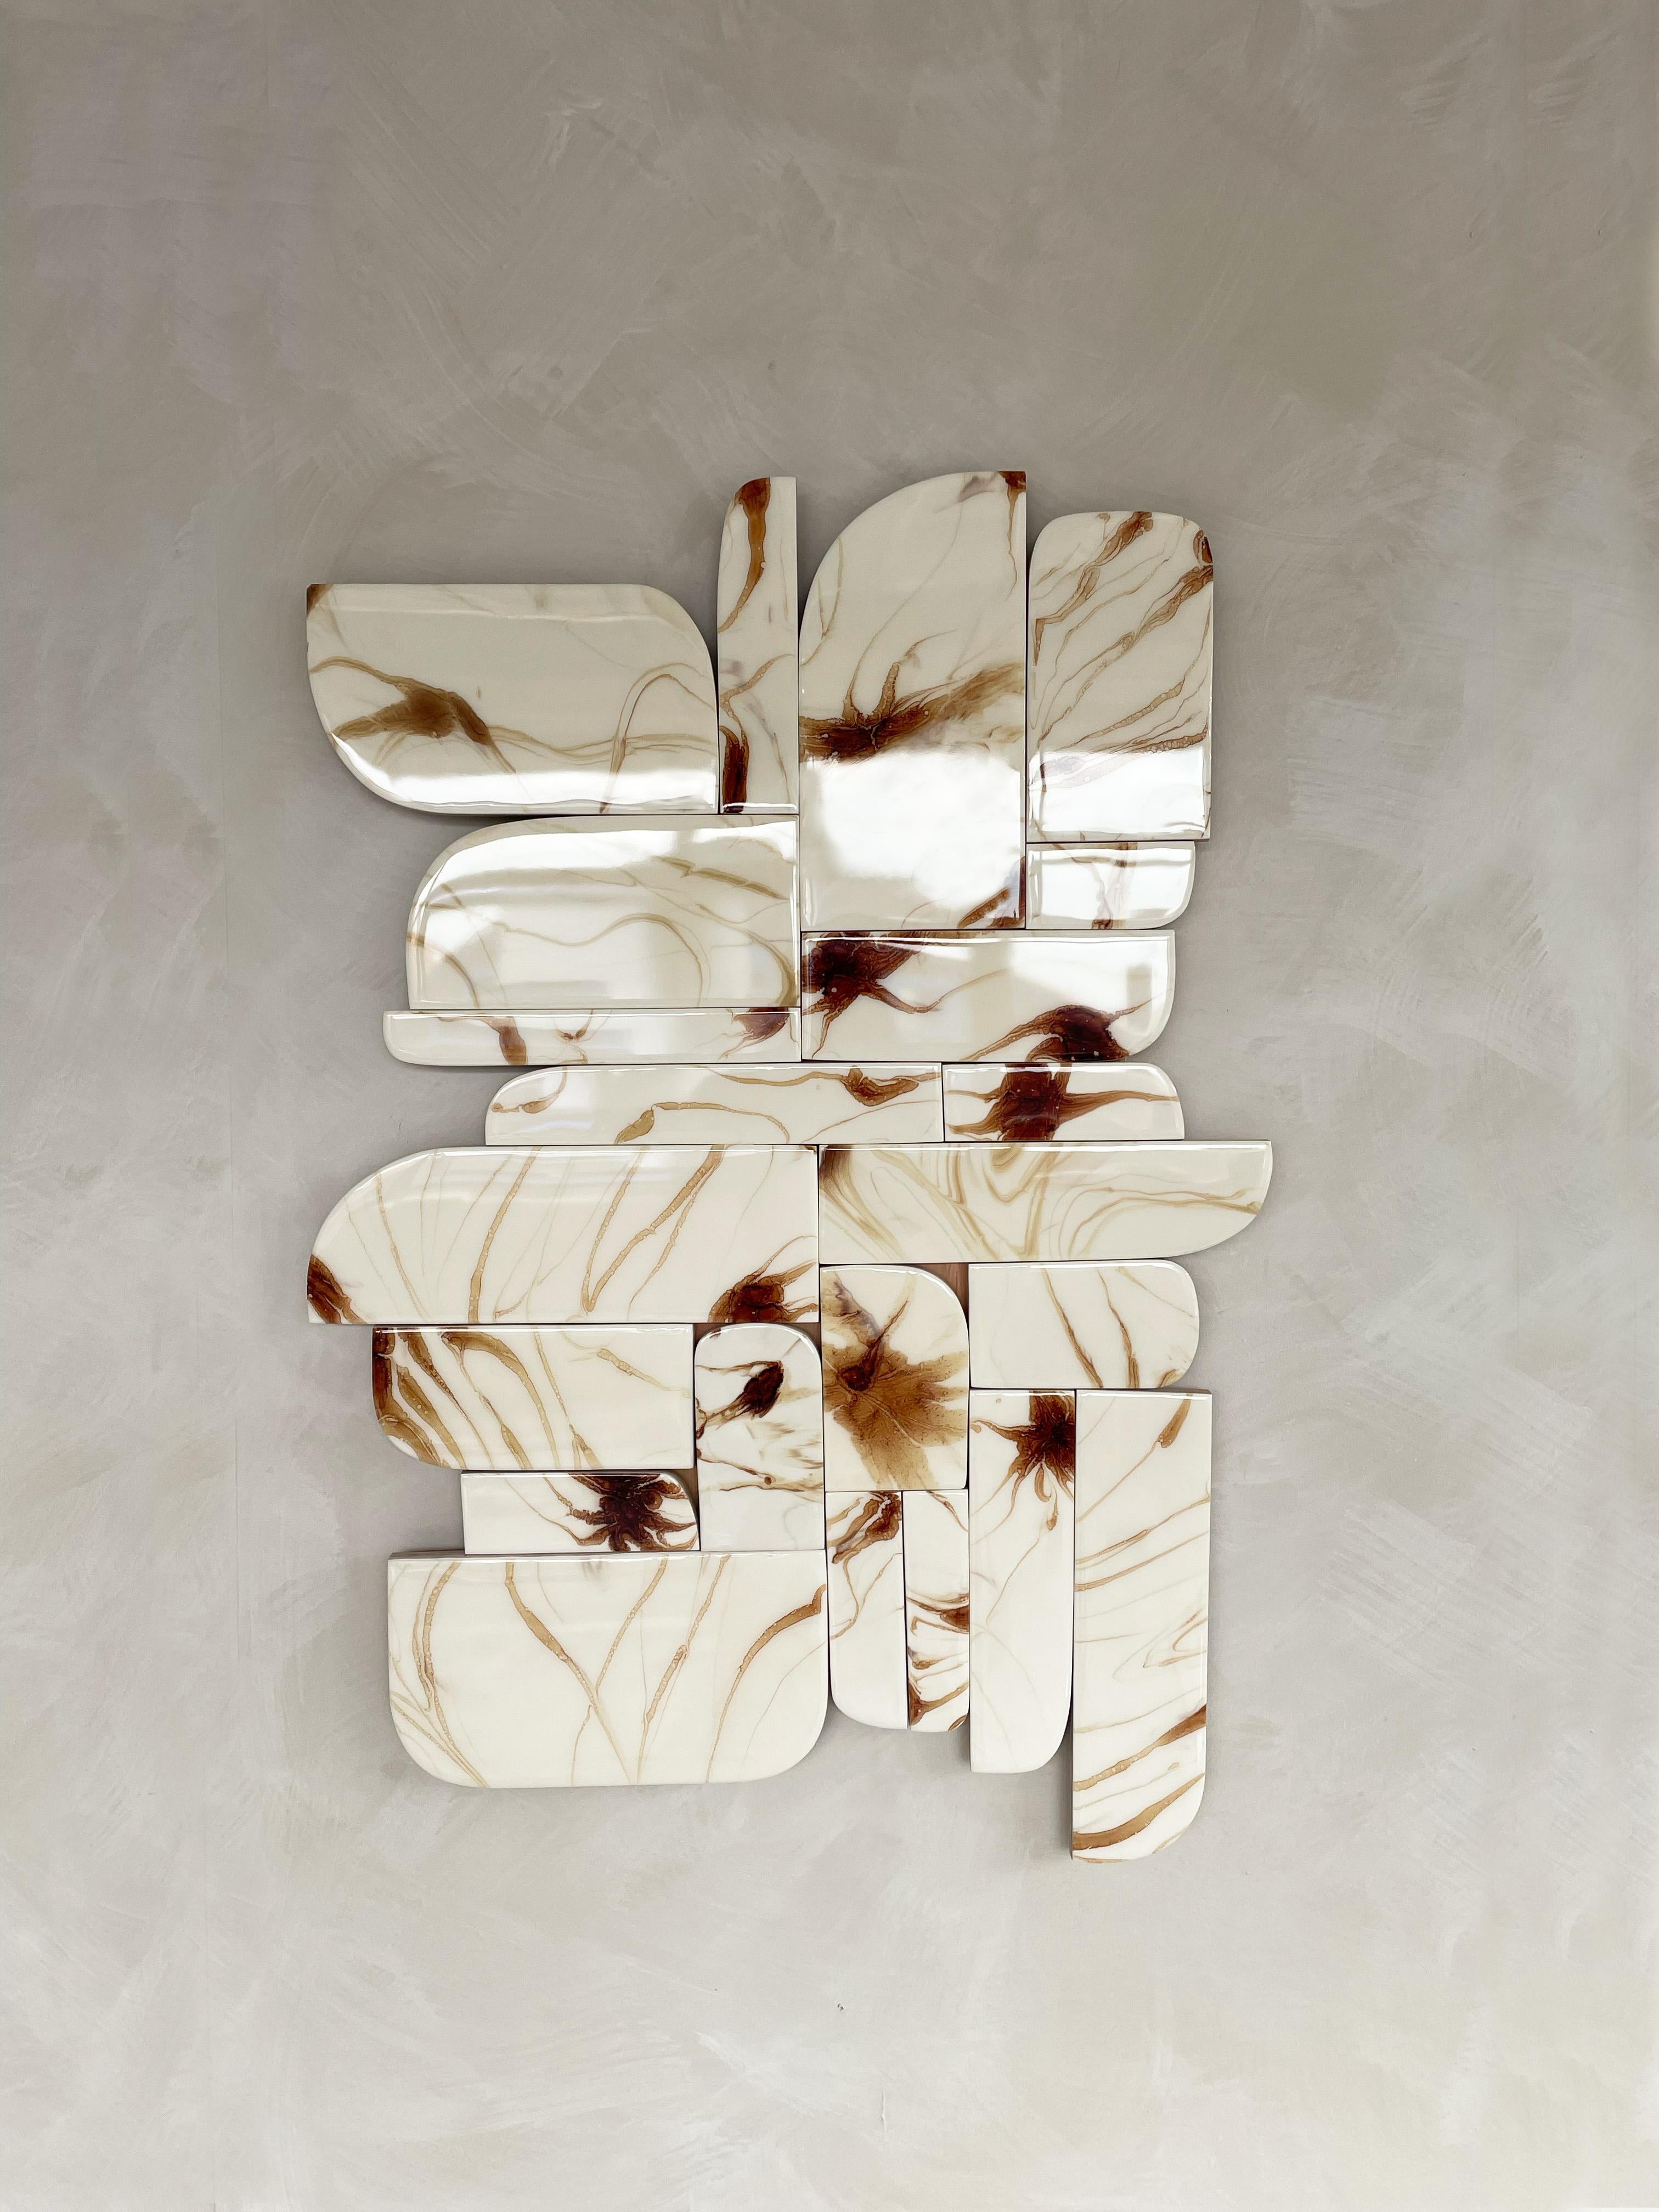 Elements #31 Wall Sculpture by Eline Baas
Dimensions: D 124 x W 5 x H 90 cm
Materials: Wax, Wood

STUDIO  ELINE BAAS is an Amsterdam-based Interior Design studio. 

Whether it is a private home, office, restaurant, hotel or the aesthetic styling of